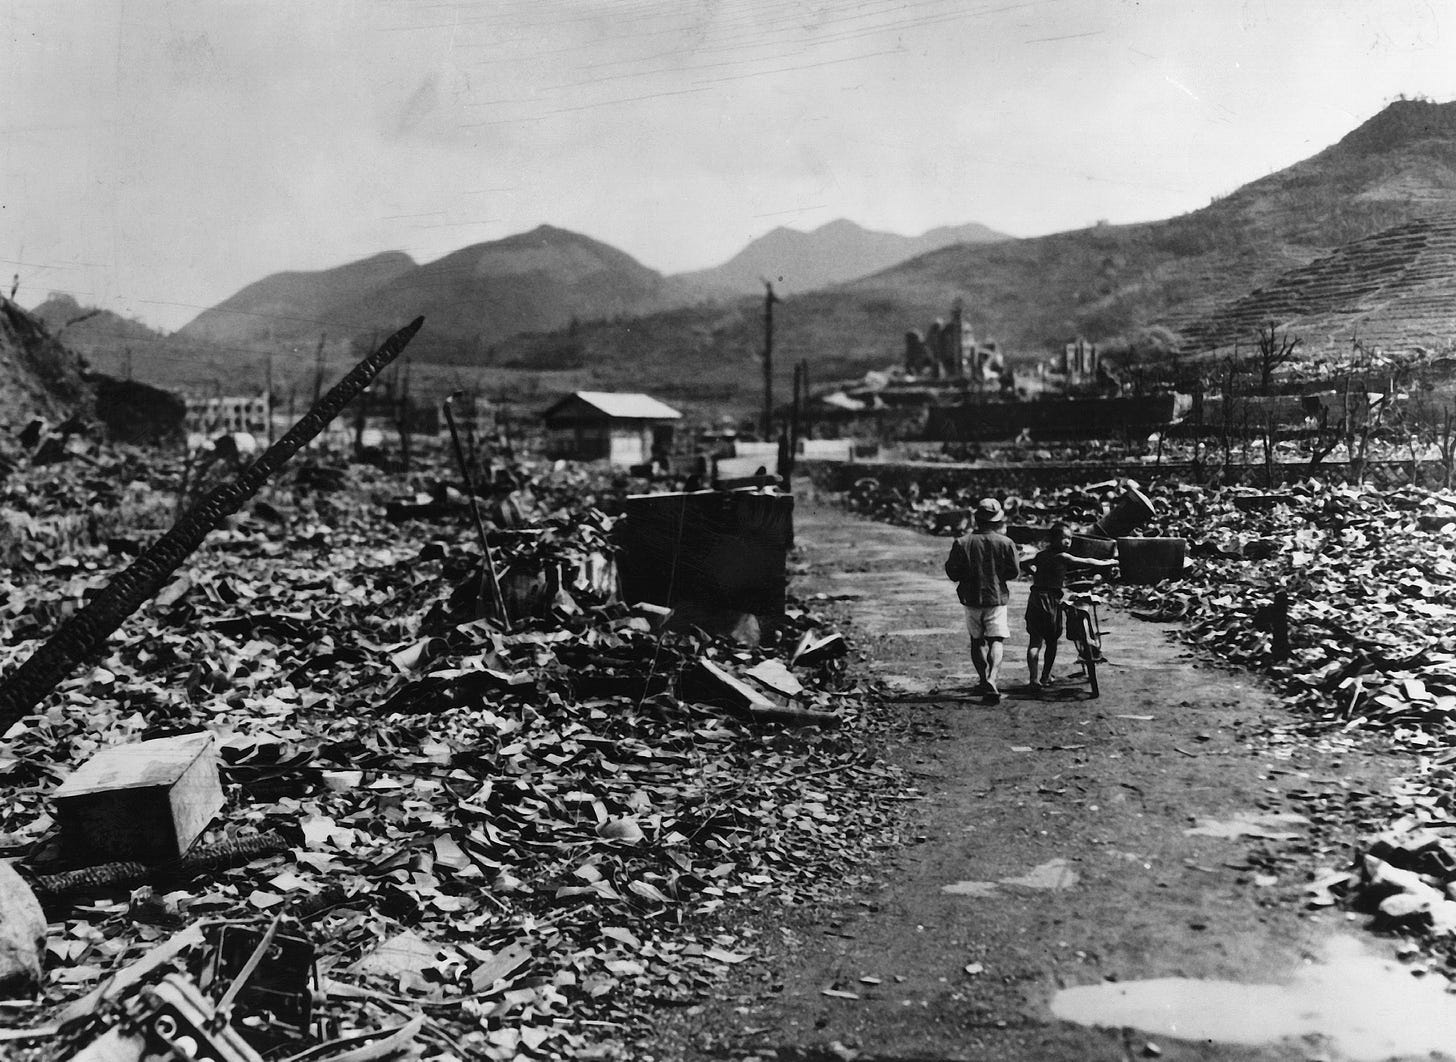 Surviving the nuclear bomb at Nagasaki 75 years ago showed me nuclear  weapons shouldn't exist